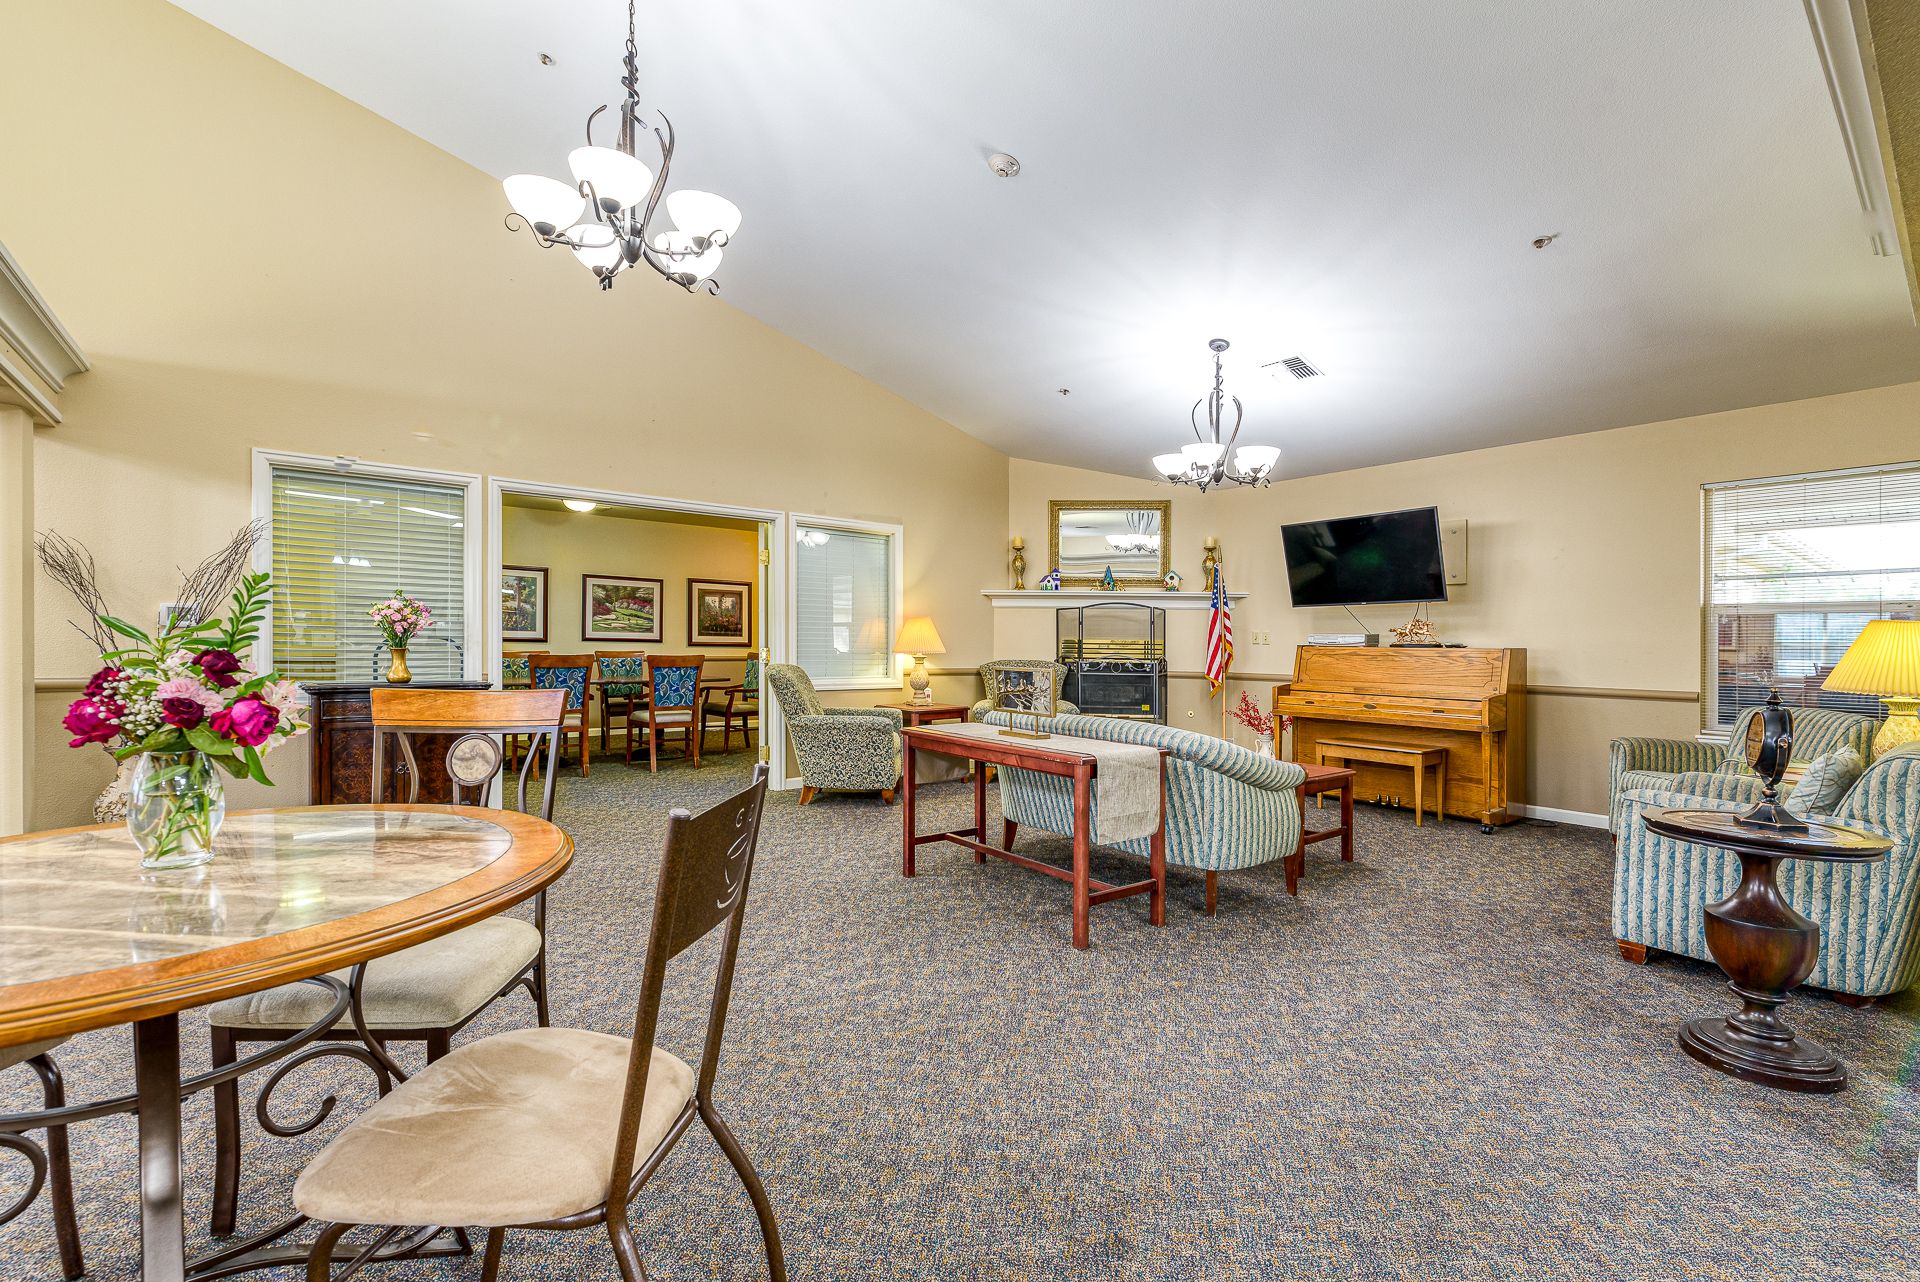 Awbrey Place Assisted Living and Memory Care 1